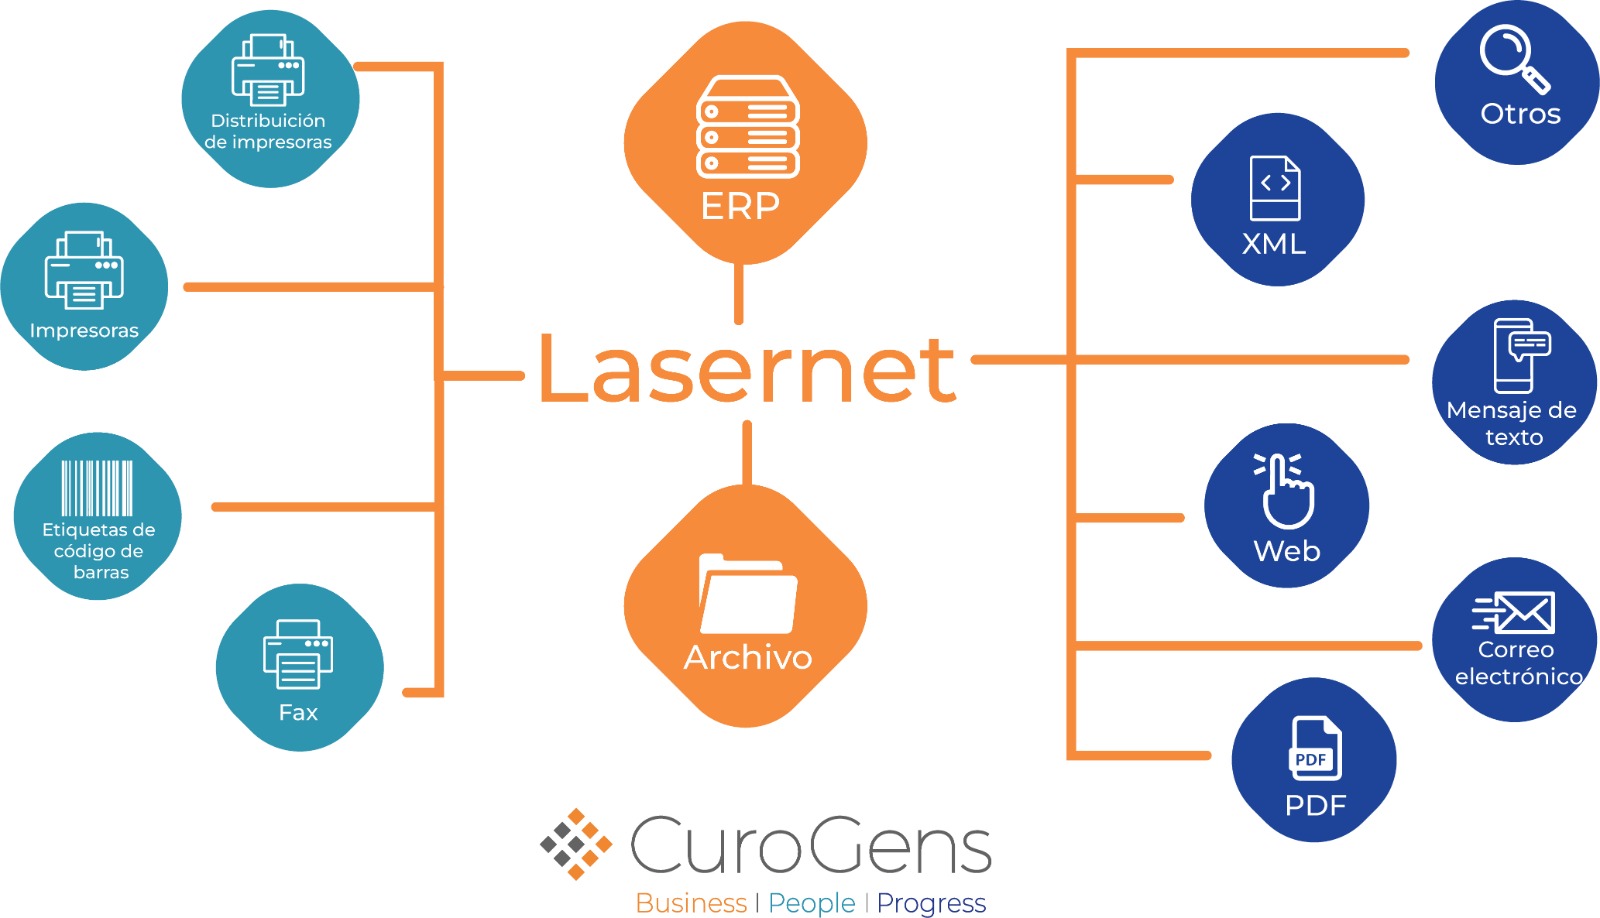 Lasernet : How to take document management to the next level